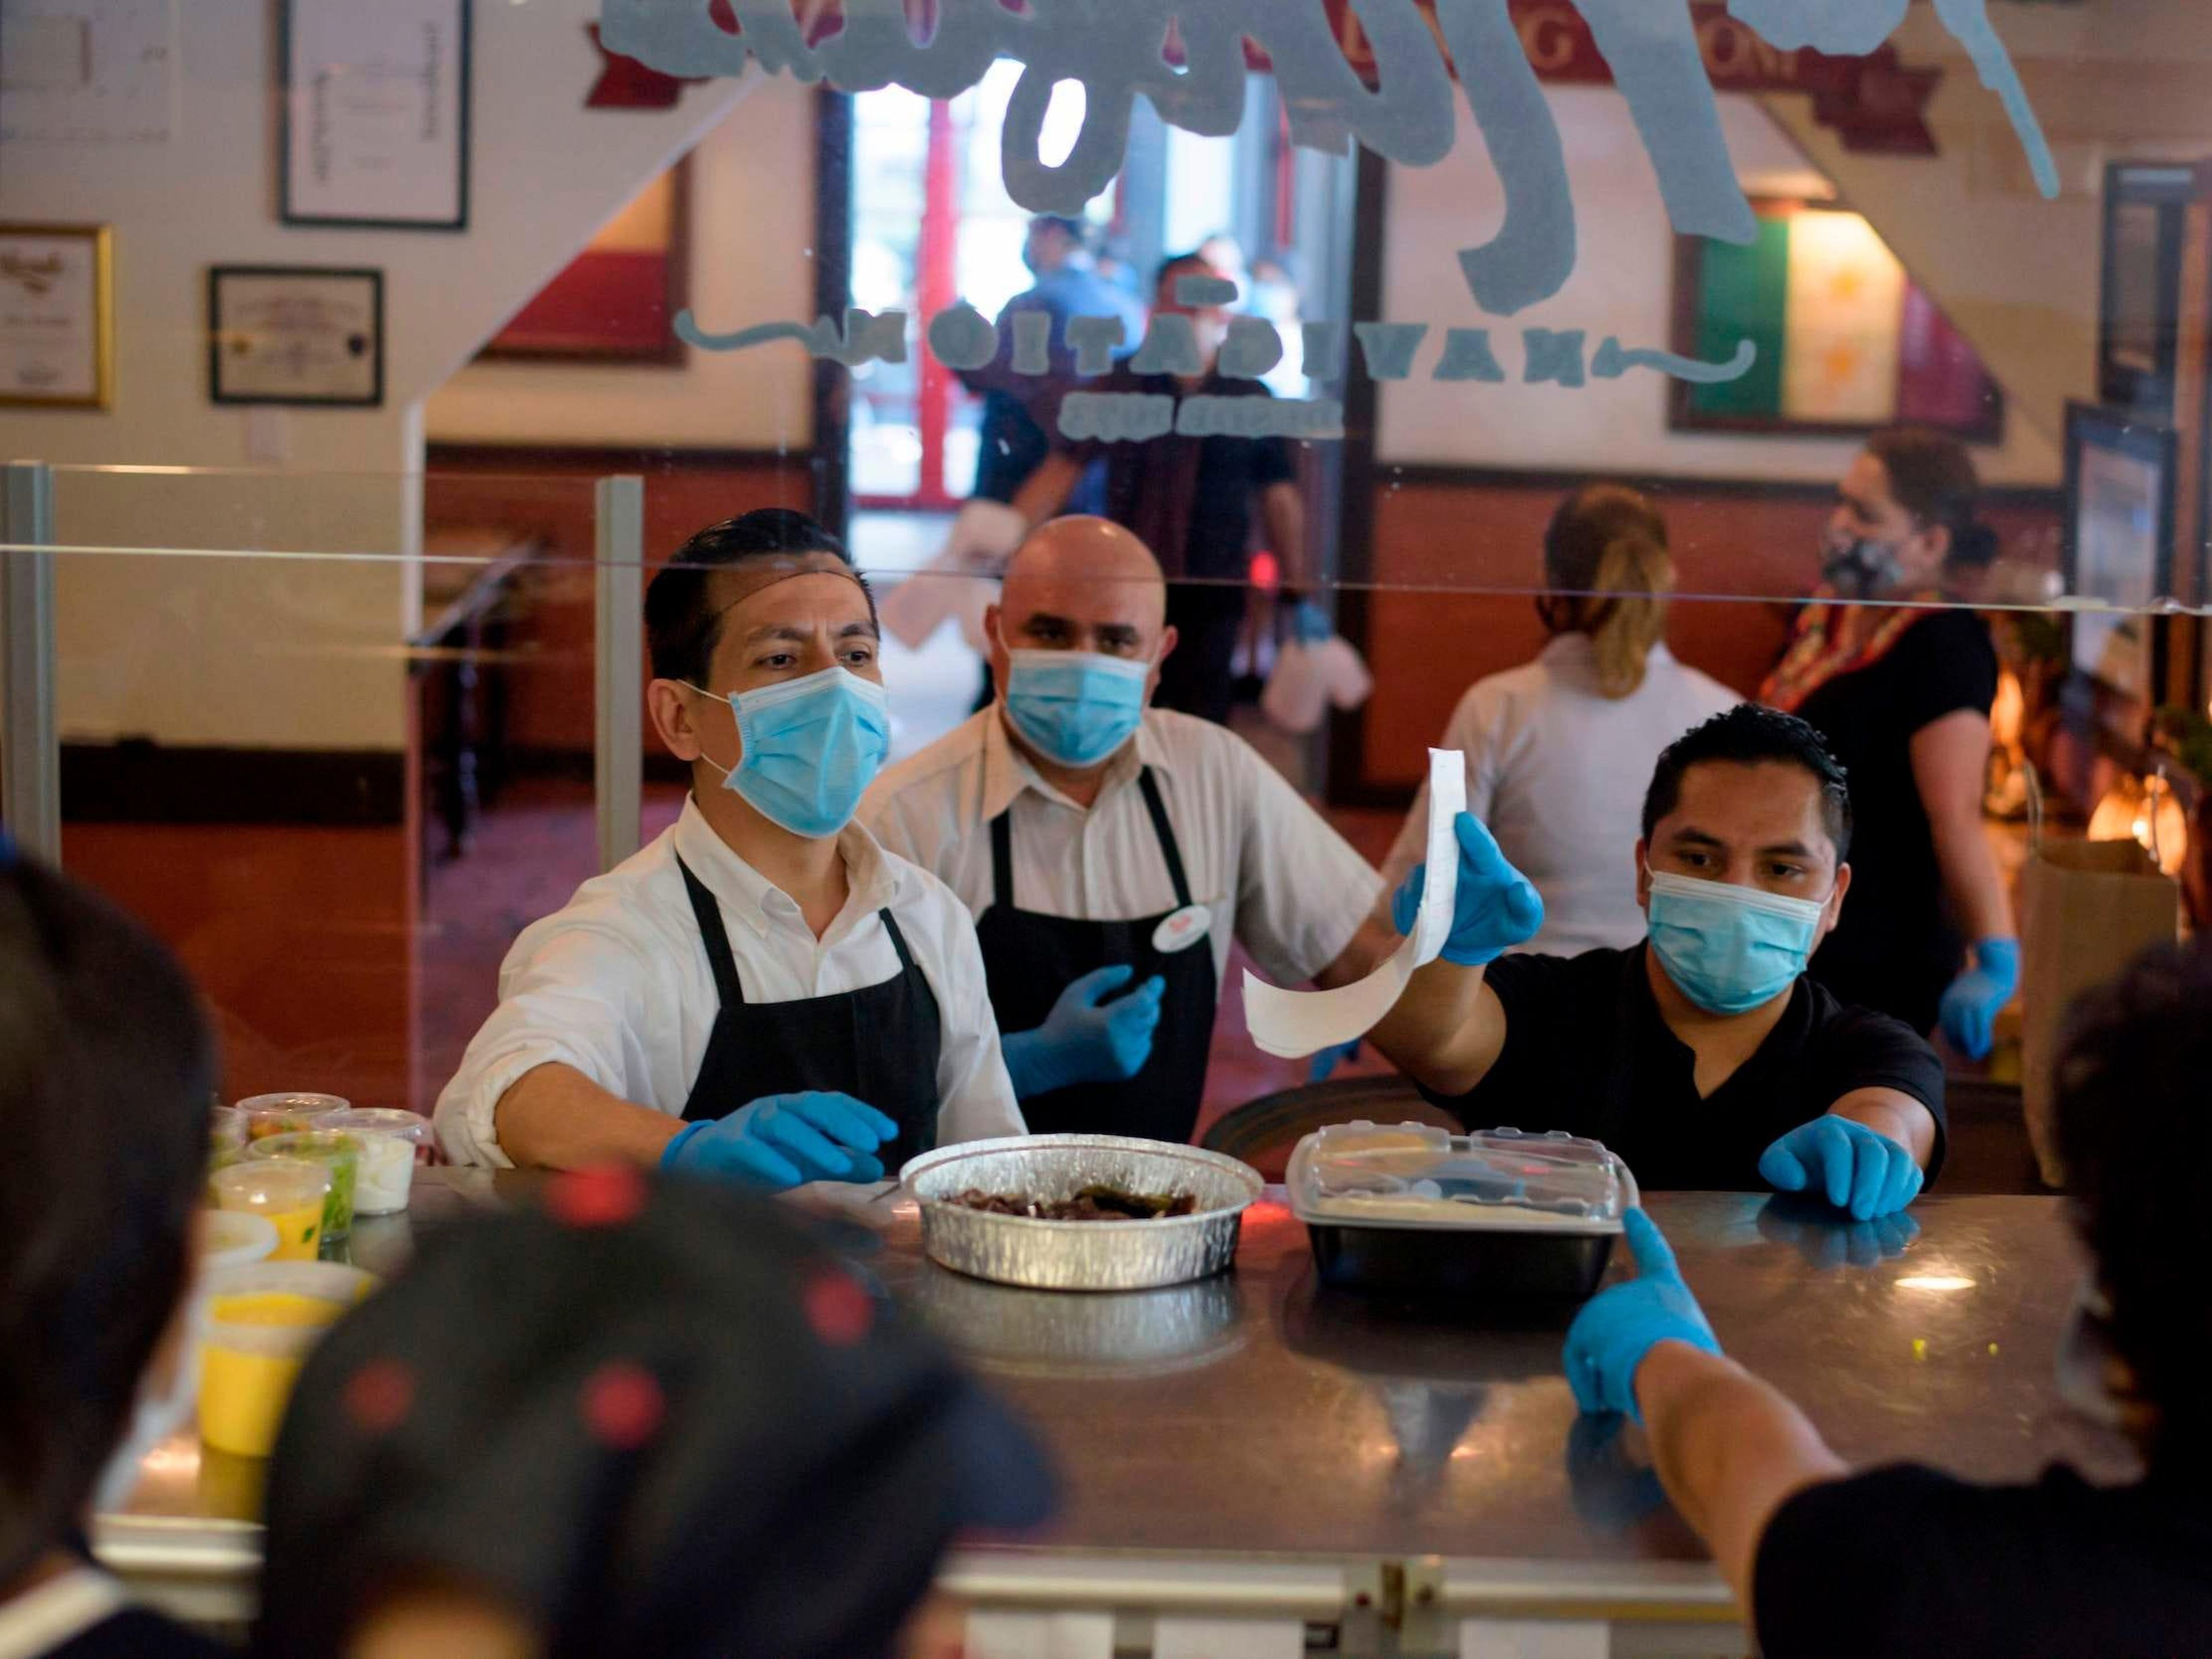 Servers wearing gloves and masks get takeout orders from the kitchen at a restaurant in Houston, Texas, on May 1.